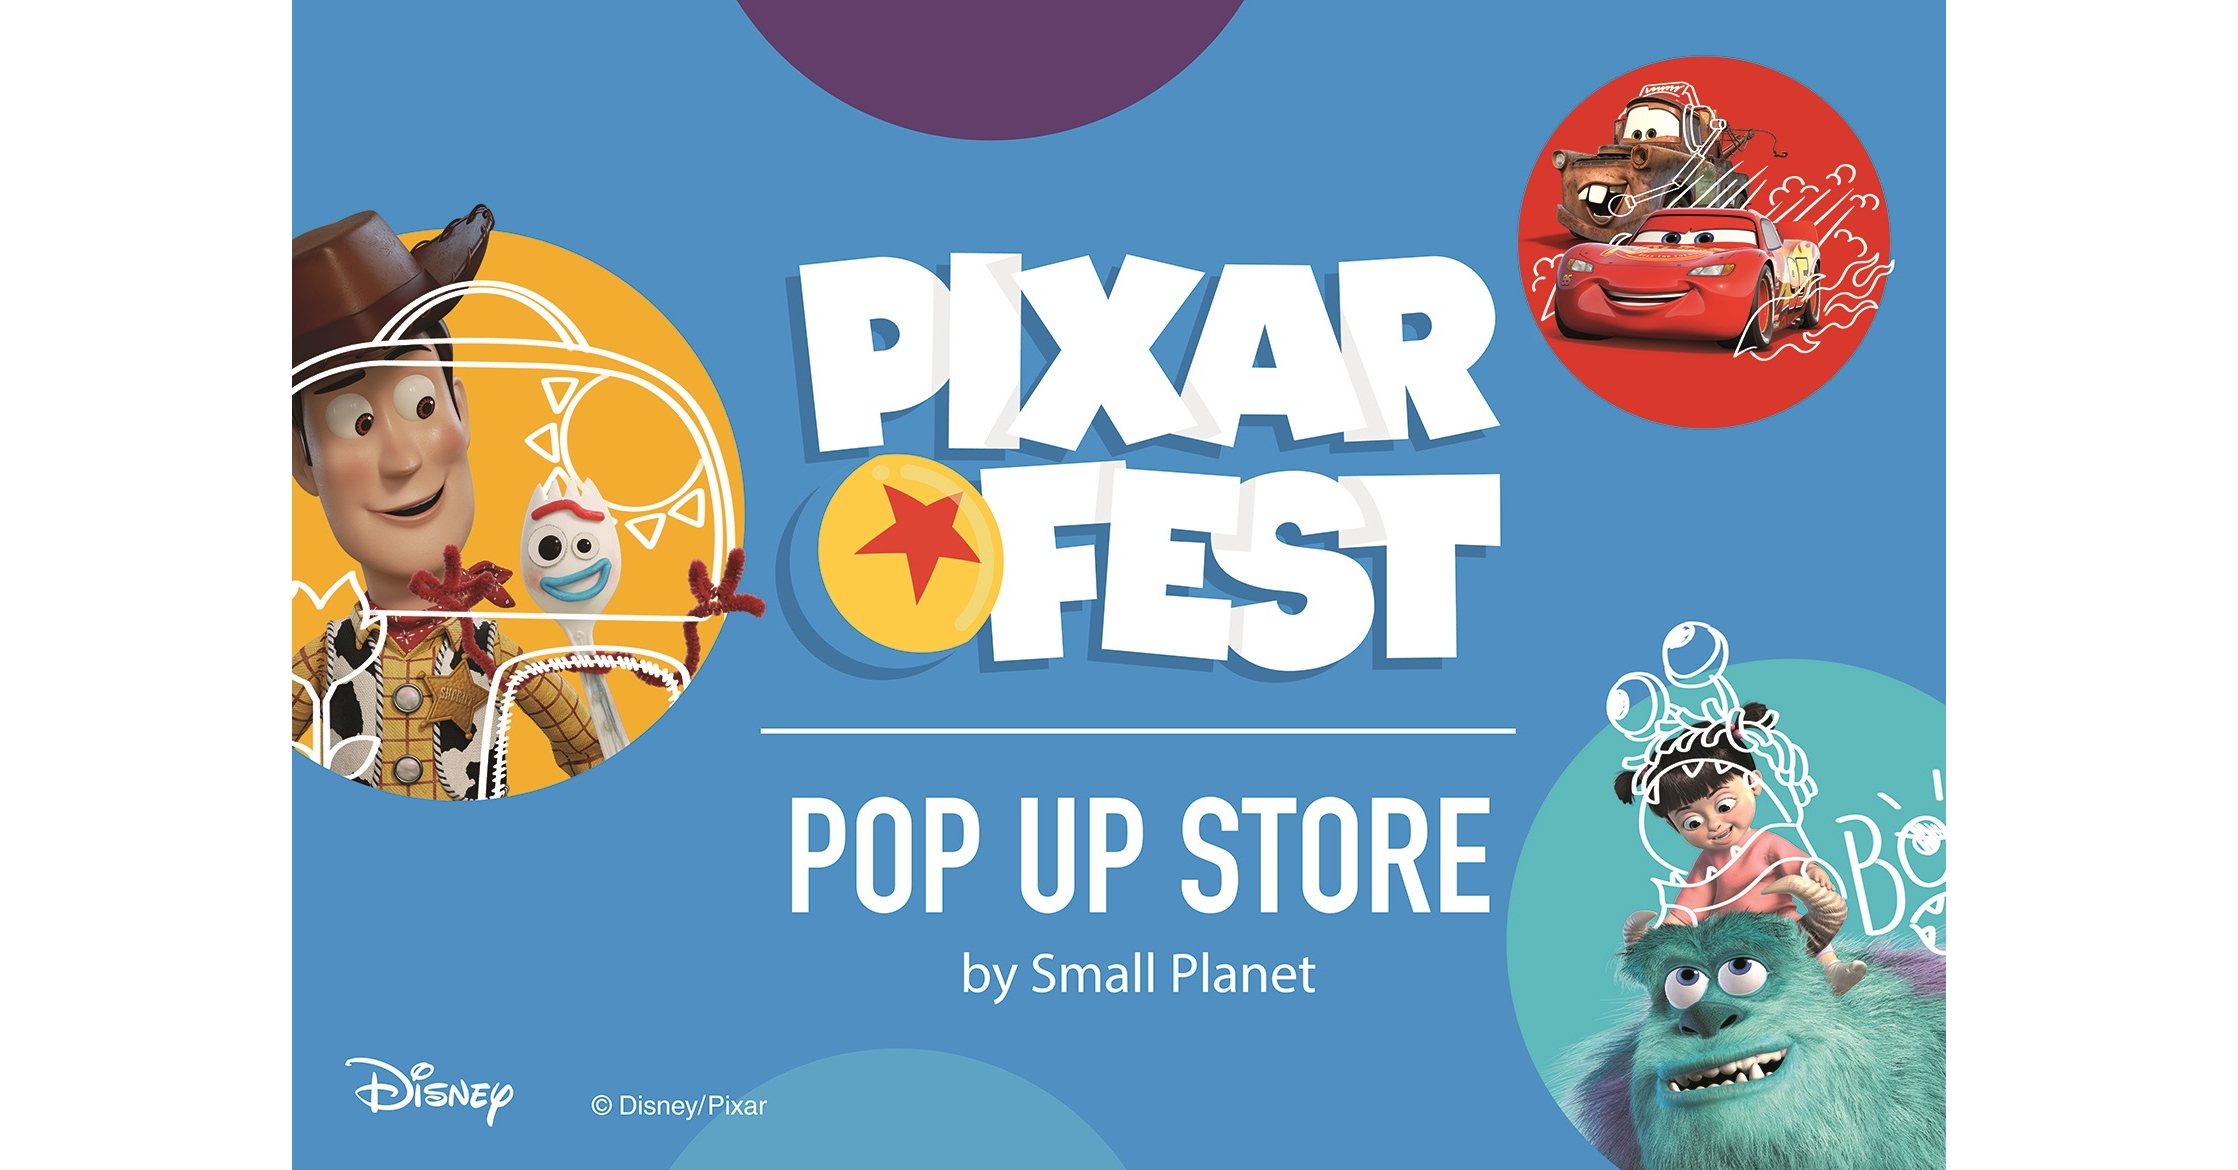 PIXAR FEST POP UP STORE by Small Planet1